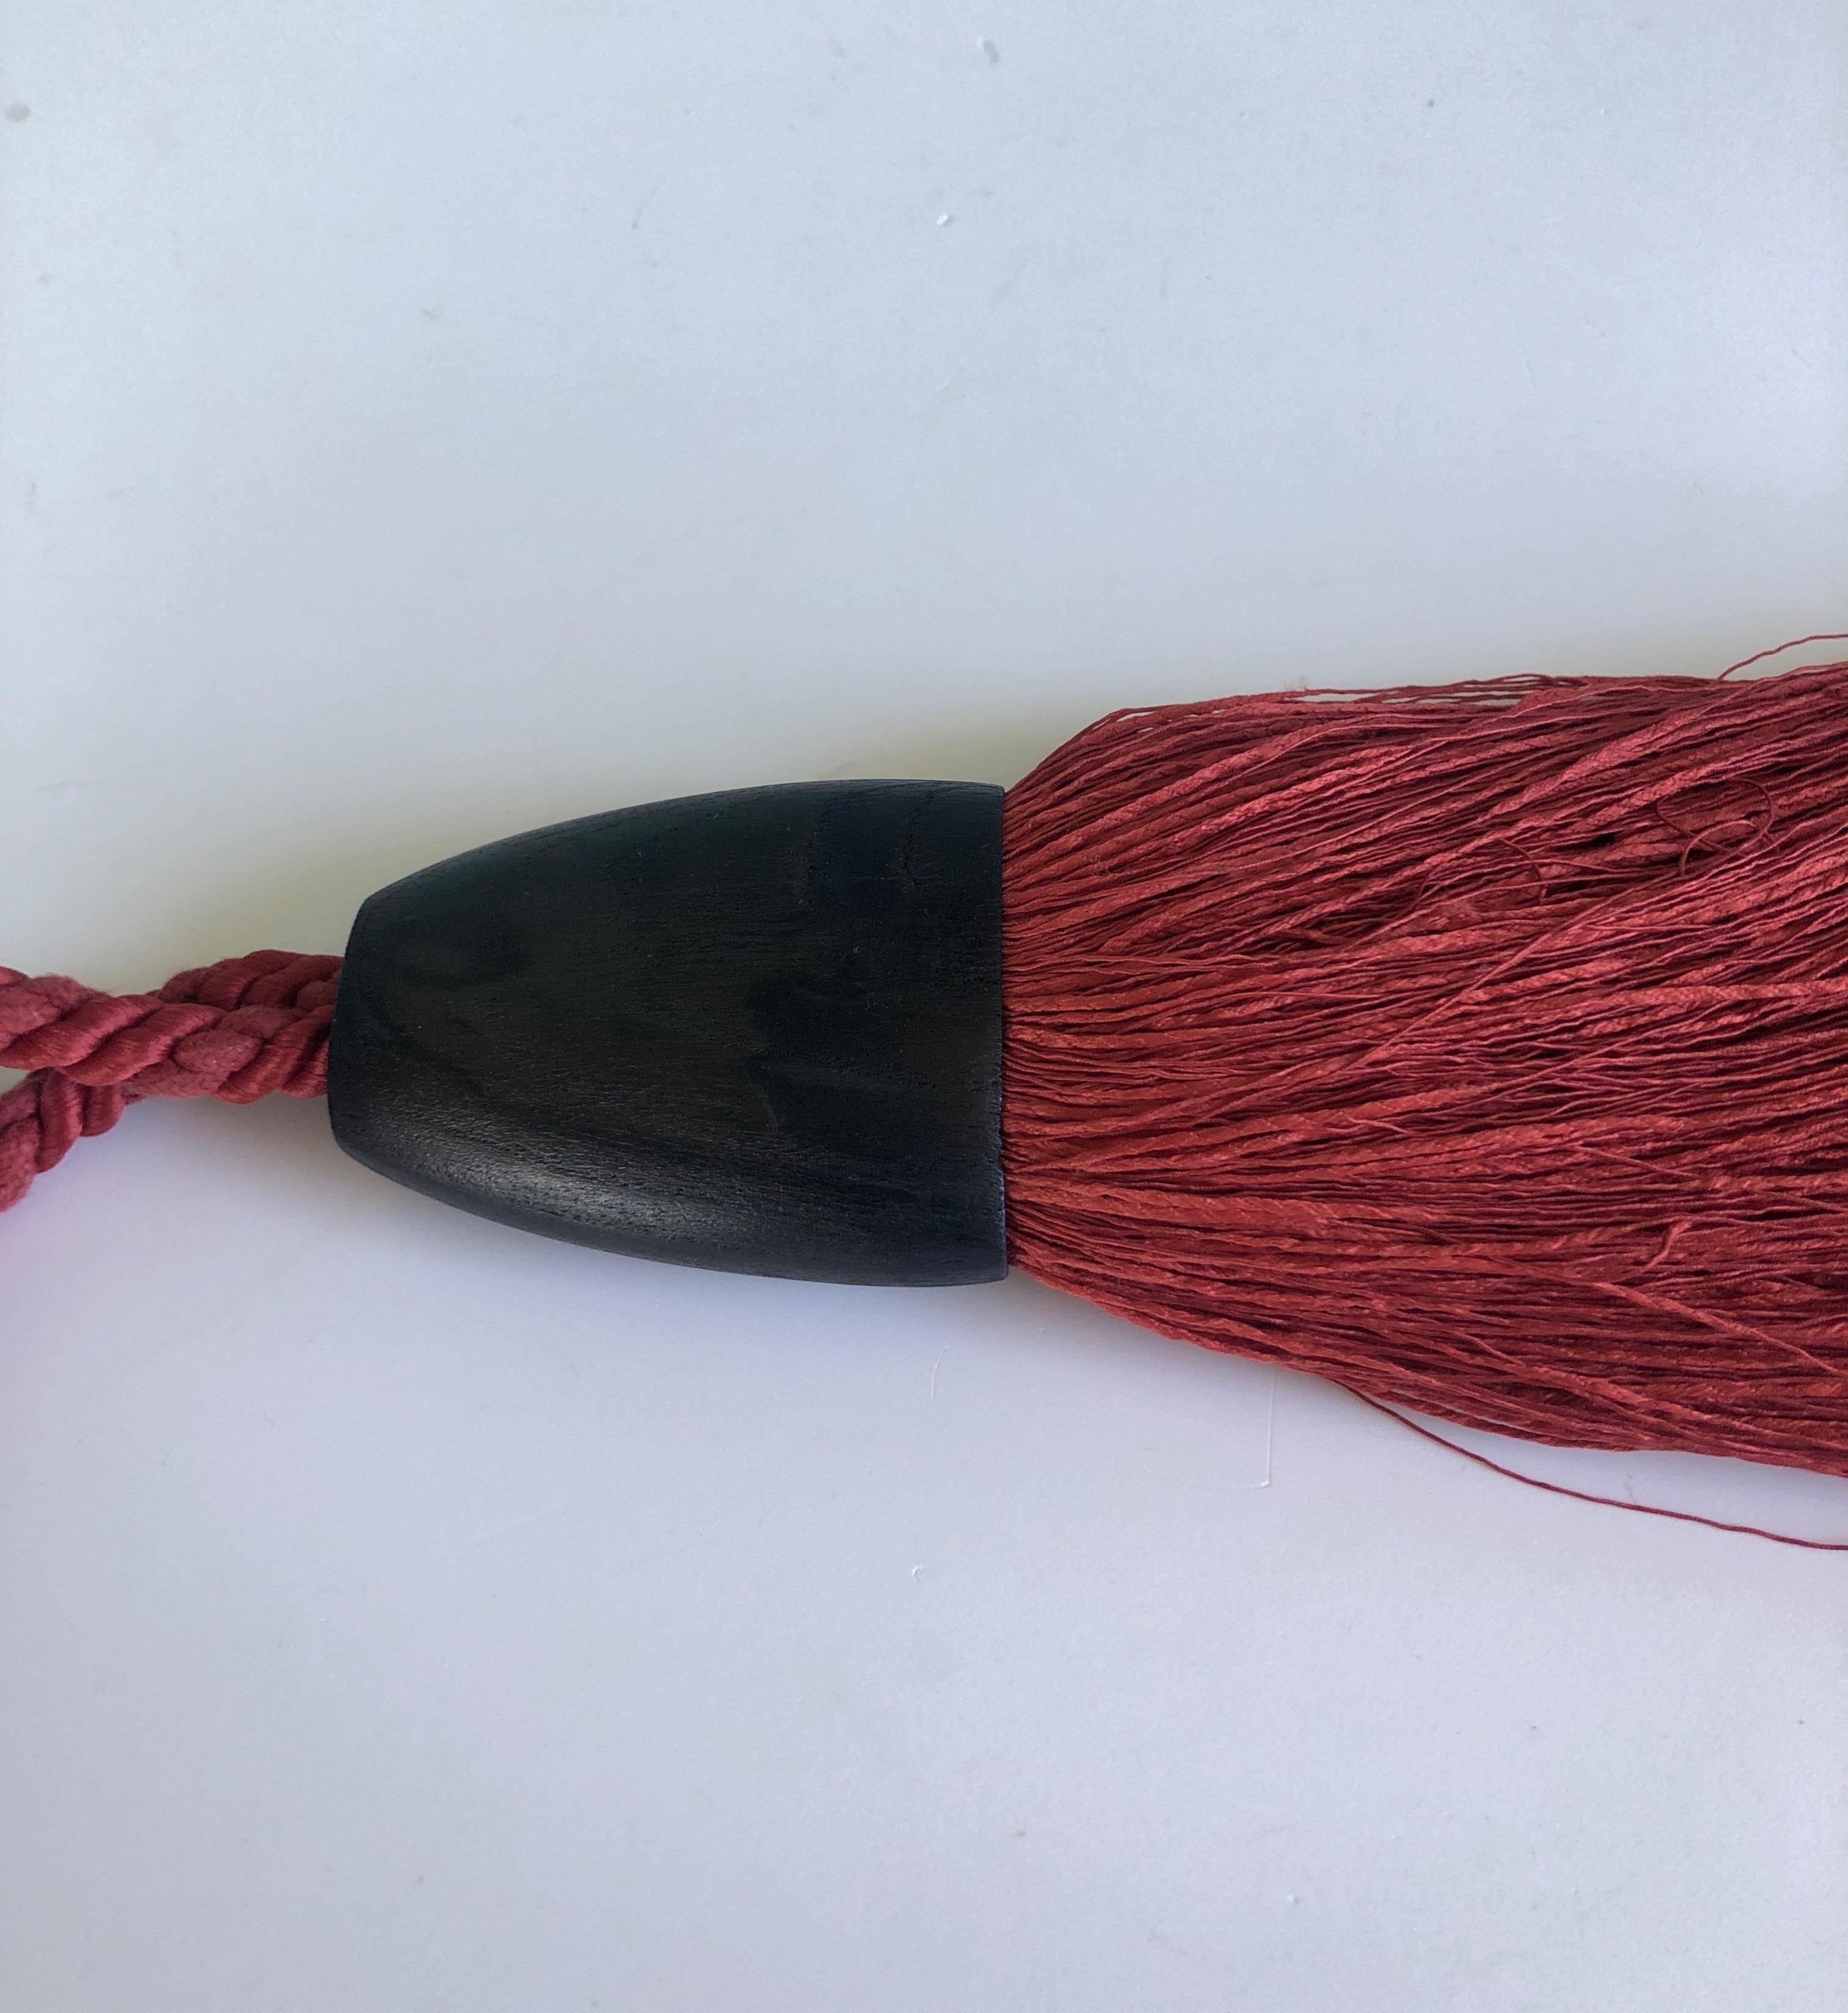 Hand-Crafted Red and Black Houles Paris Curtain Tassel Tieback